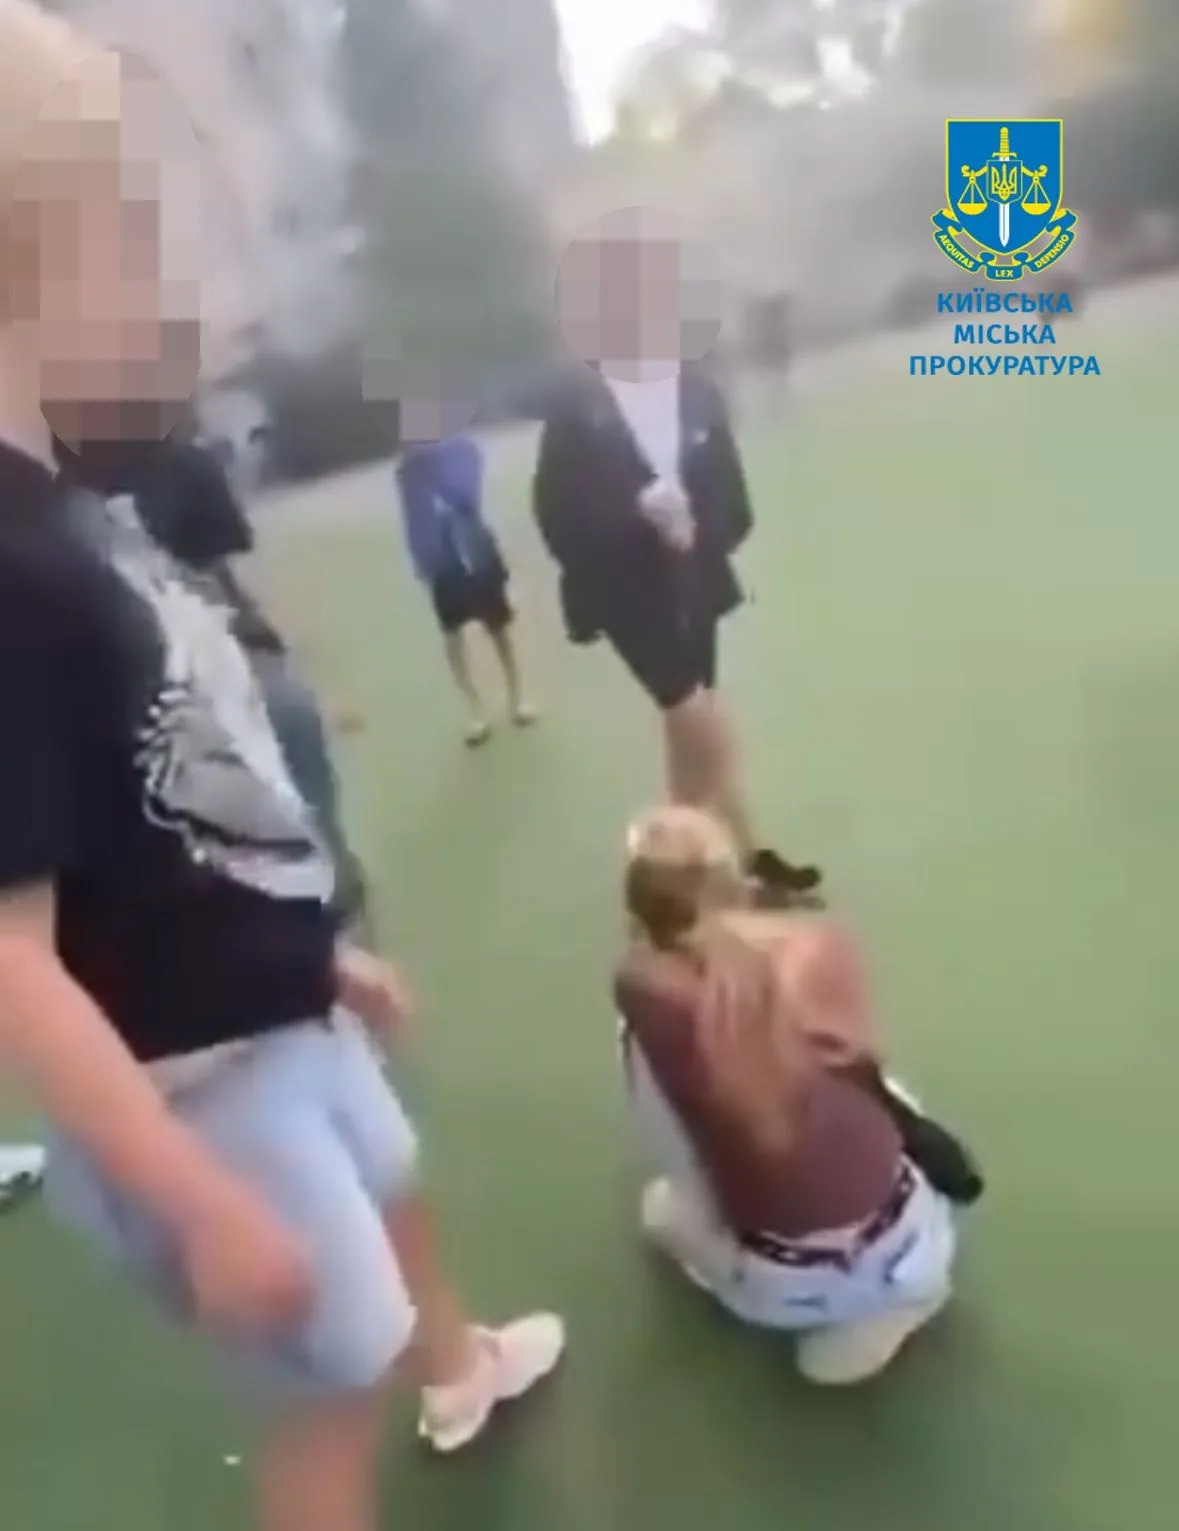 in-kiev-they-filmed-the-beating-of-a-schoolgirl-by-a-group-of-teenagers-three-girls-were-identified-an-investigation-was-launched